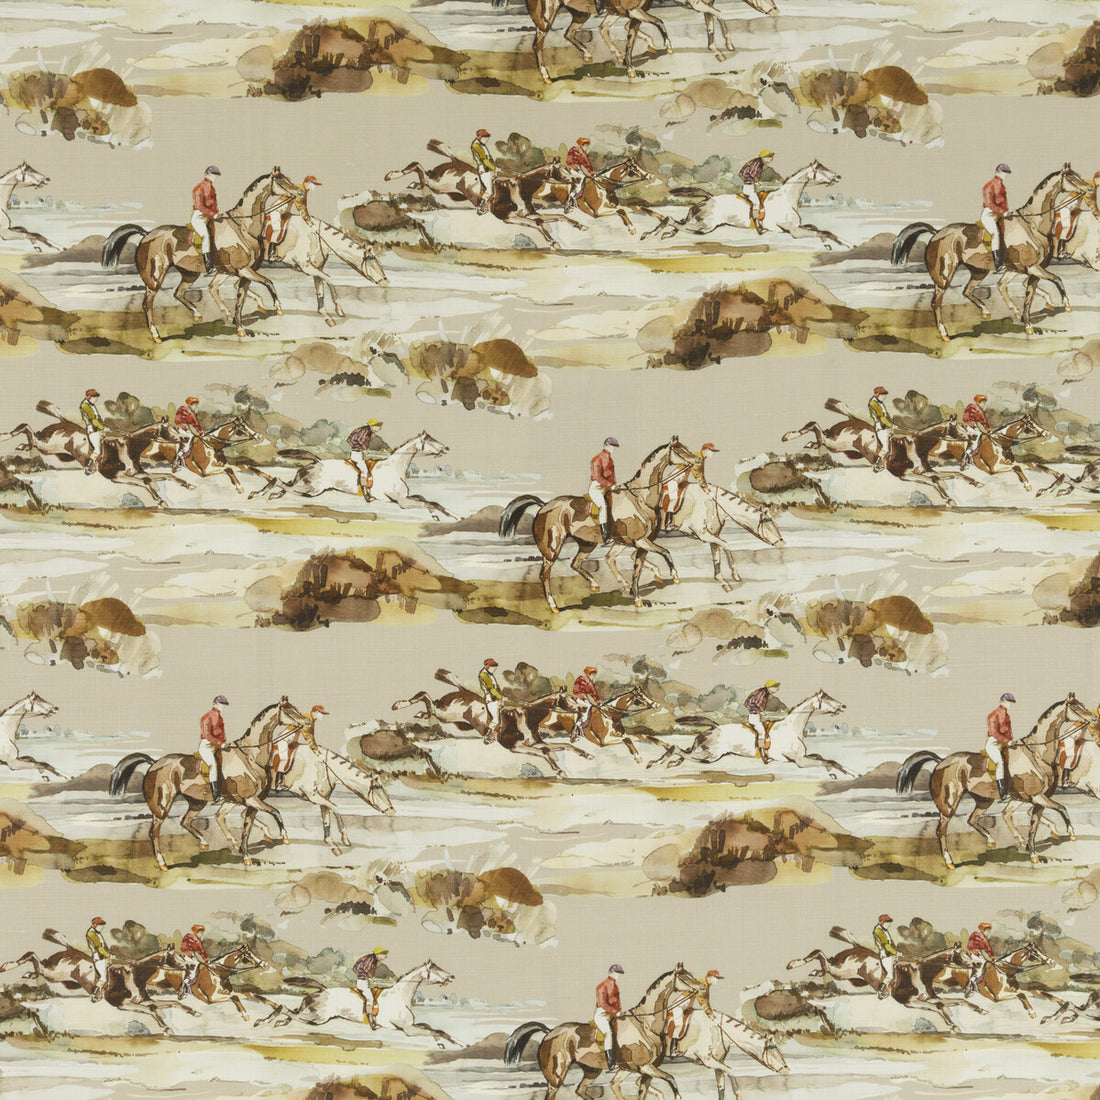 Morning Gallop Linen fabric in grey/sand color - pattern FD294.A46.0 - by Mulberry in the Festival collection